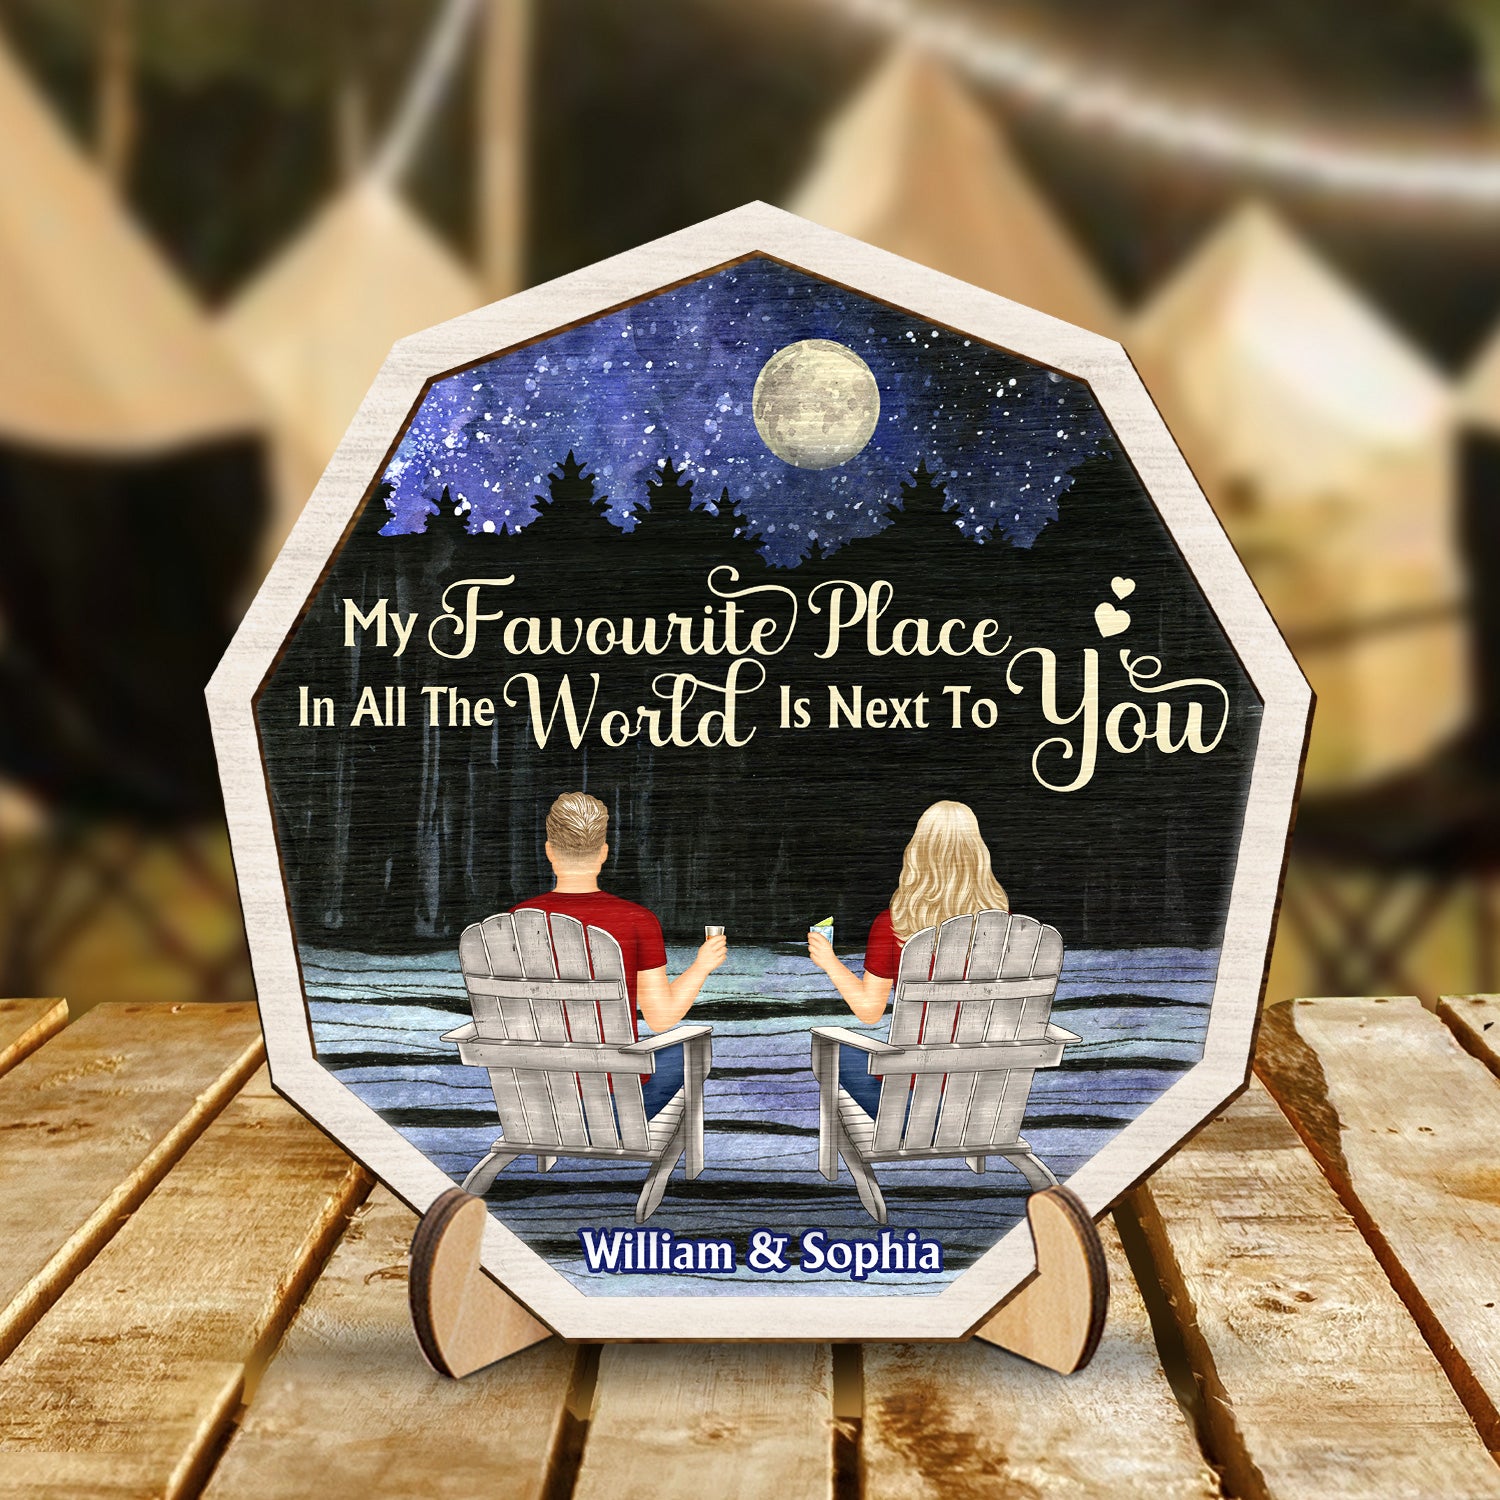 My Favourite Place Couple Back Sitting On Chairs - Loving, Anniversary Gift For Spouse, Husband, Wife - Personalized 2-Layered Wooden Plaque With Stand